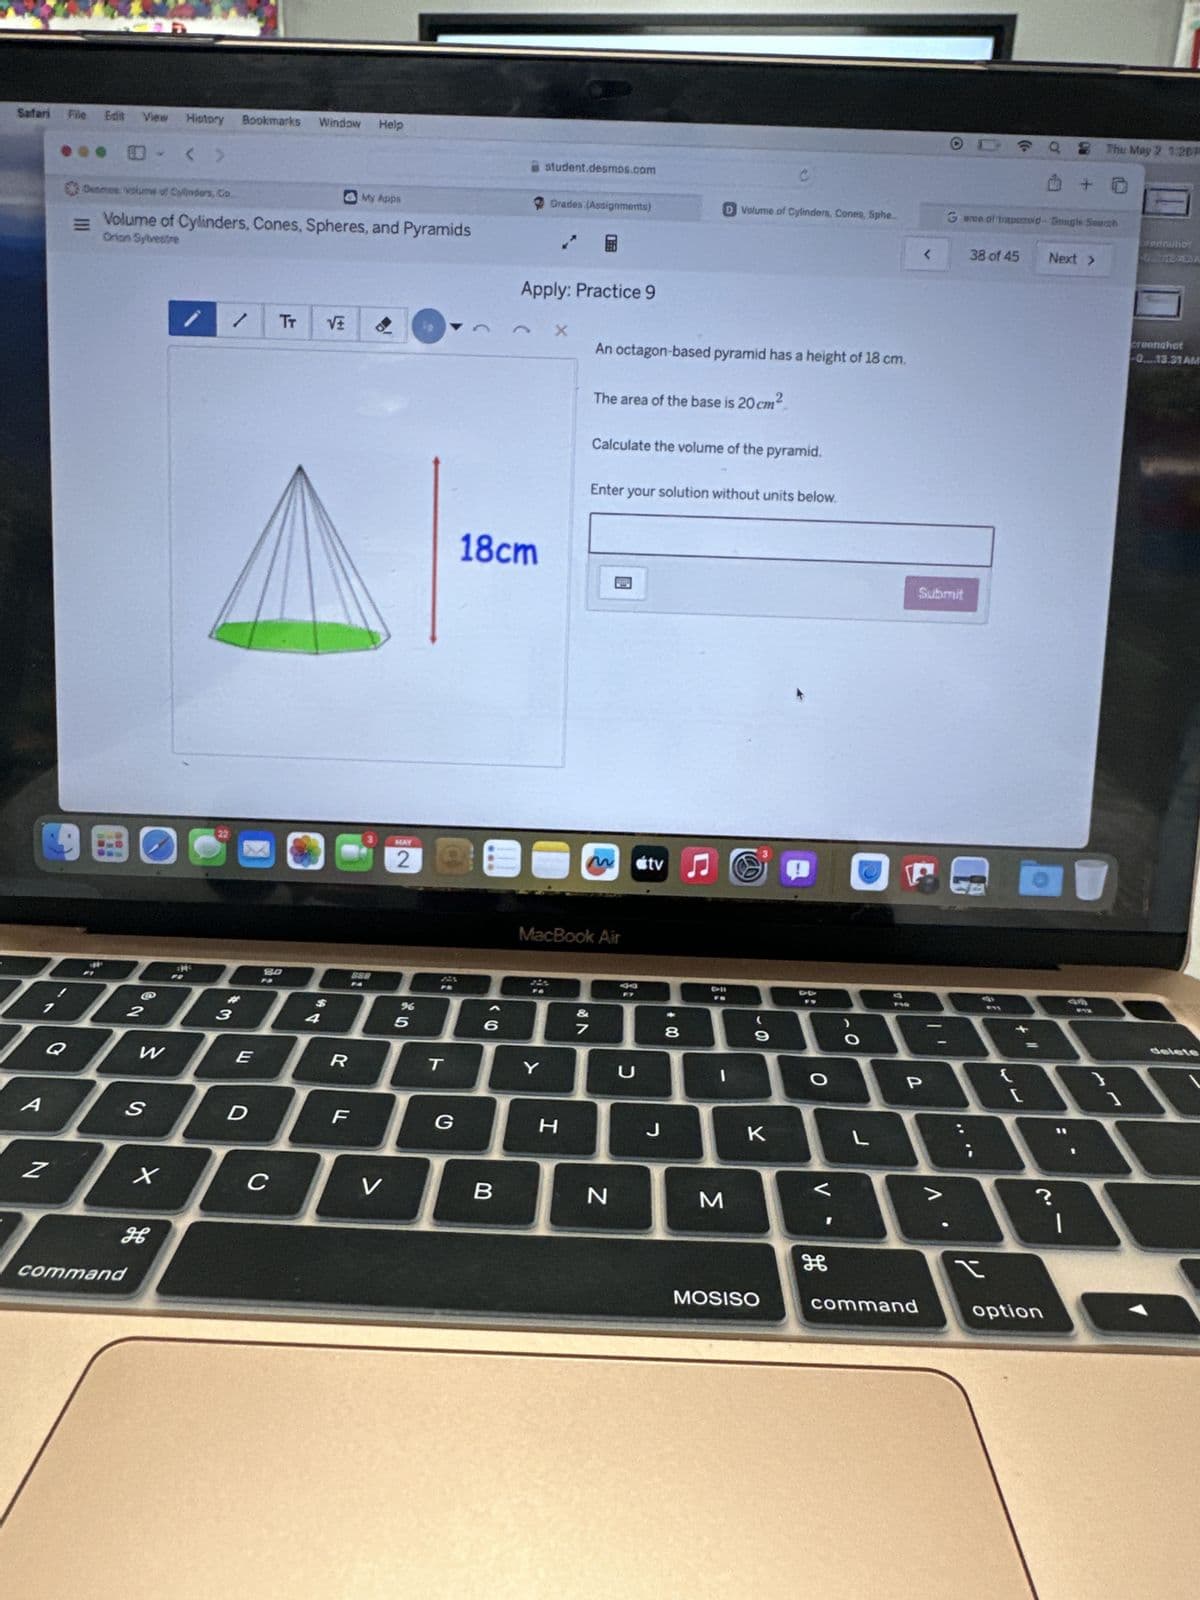 Safari
File
Edit View History Bookmarks Window Help
0 < >
student.desmos.com
C
Demos volume of Cylinders, Co.
My Apps
Grades (Assignments)
D Volume of Cylinders, Cones, Spho.
11
Volume of Cylinders, Cones, Spheres, and Pyramids
Orion Sylvestre
Apply: Practice 9
TT
X
90
18cm
An octagon-based pyramid has a height of 18 cm.
The area of the base is 20 cm
2
Calculate the volume of the pyramid.
Enter your solution without units below.
22
MAY
3
2
M
tv
Л
80
BBBB
2
3
4
QWER
888
45
%
MacBook Air
BB
7
T
Y
U
* 00
I
9
O
О
A
S
D
F
G
H
J
K
L
QThu May 2 1:26P
Garee of trapezoid- Google Sourch
<
38 of 45
Next >
Submit
creenshot
-0.13.31 AM
P
T
1
Z
X
<
C
>
V
B
?
N
M
H
H
command
MOSISO
command
option
delete